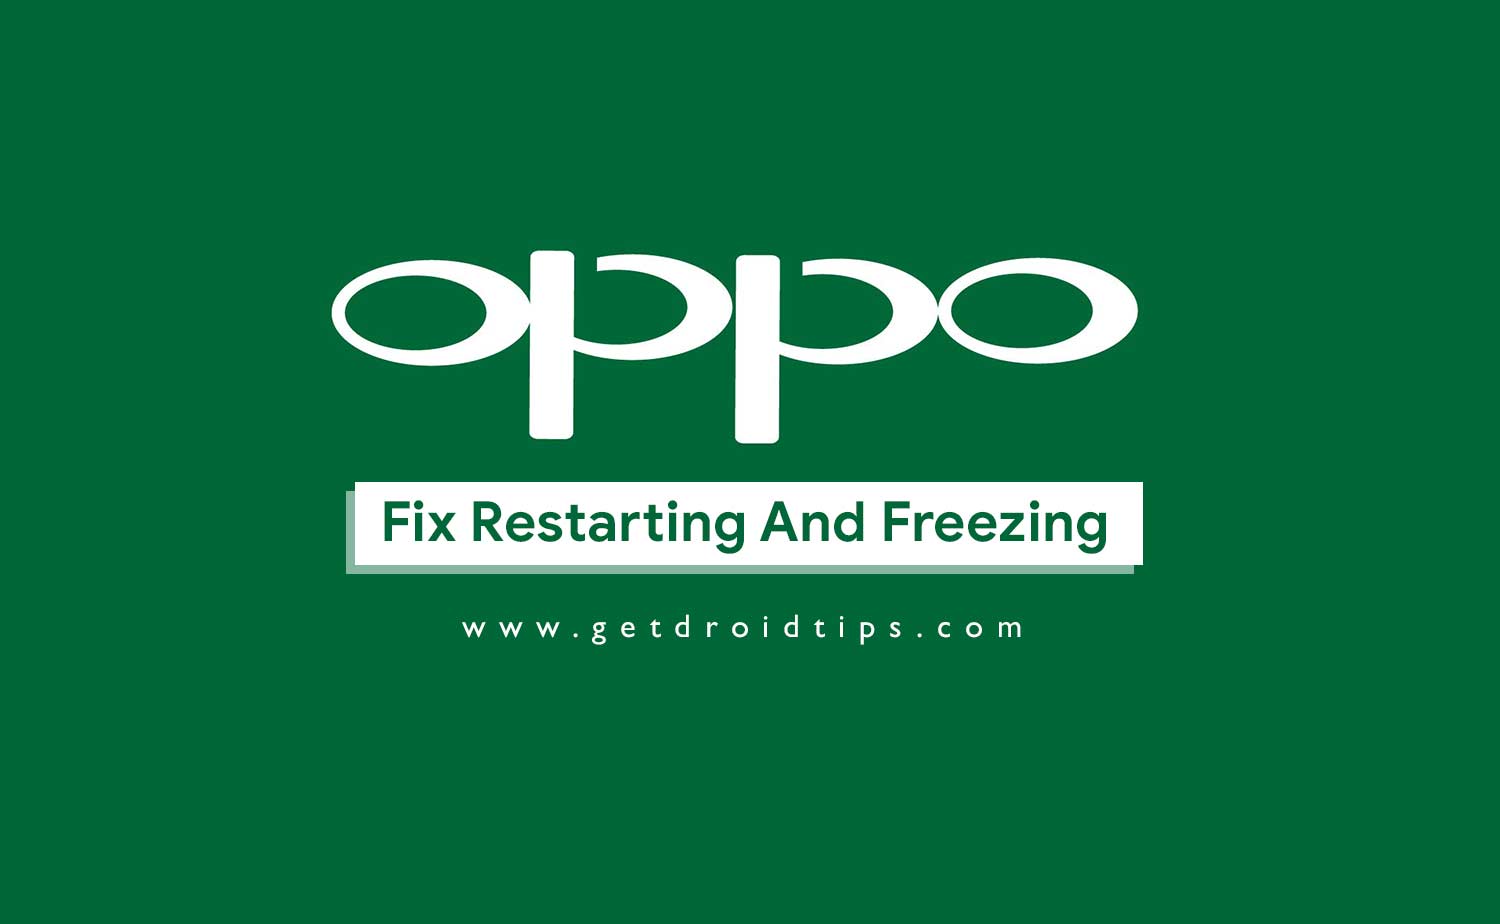 How To Fix OPPO Restarting And Freezing Problem?